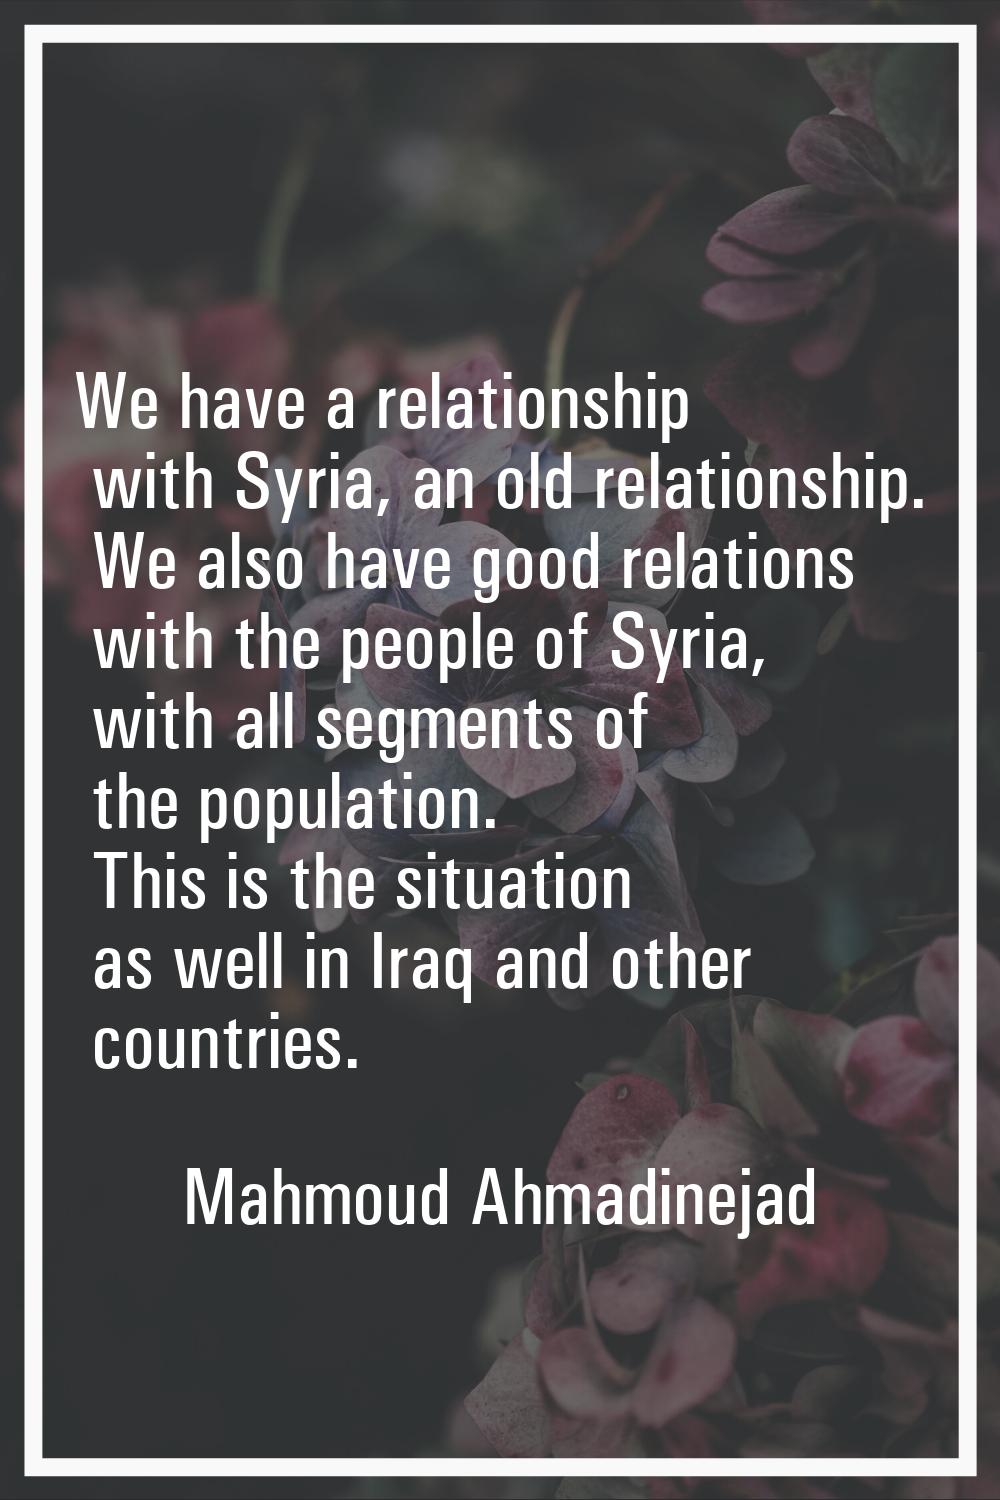 We have a relationship with Syria, an old relationship. We also have good relations with the people